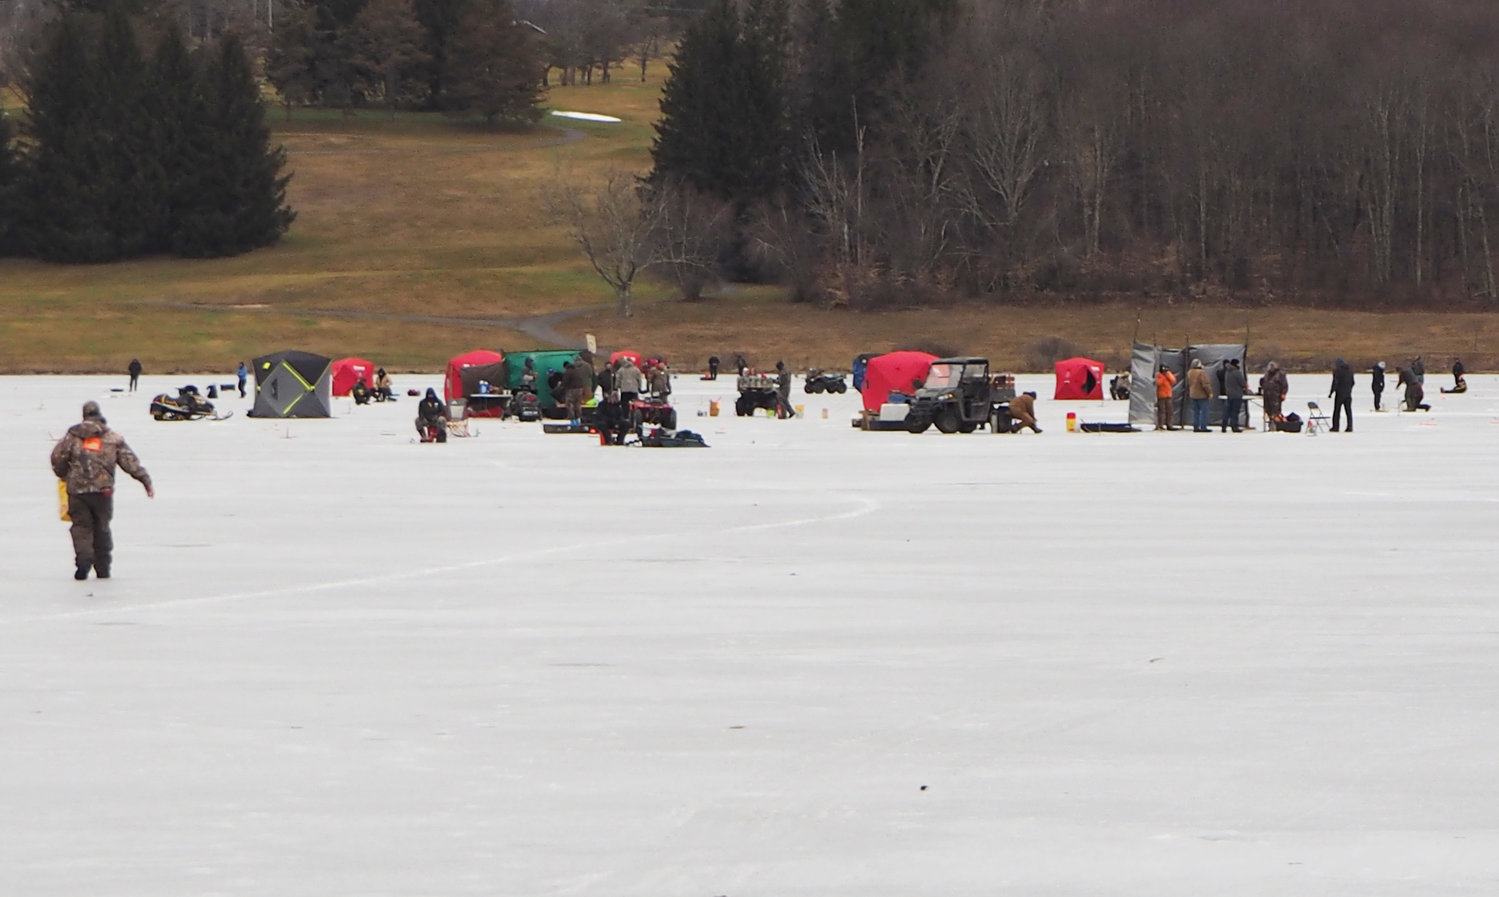 Morningside Lake’s seven inches of ice made for a great day of fishing as 181 anglers set up on Saturday morning.